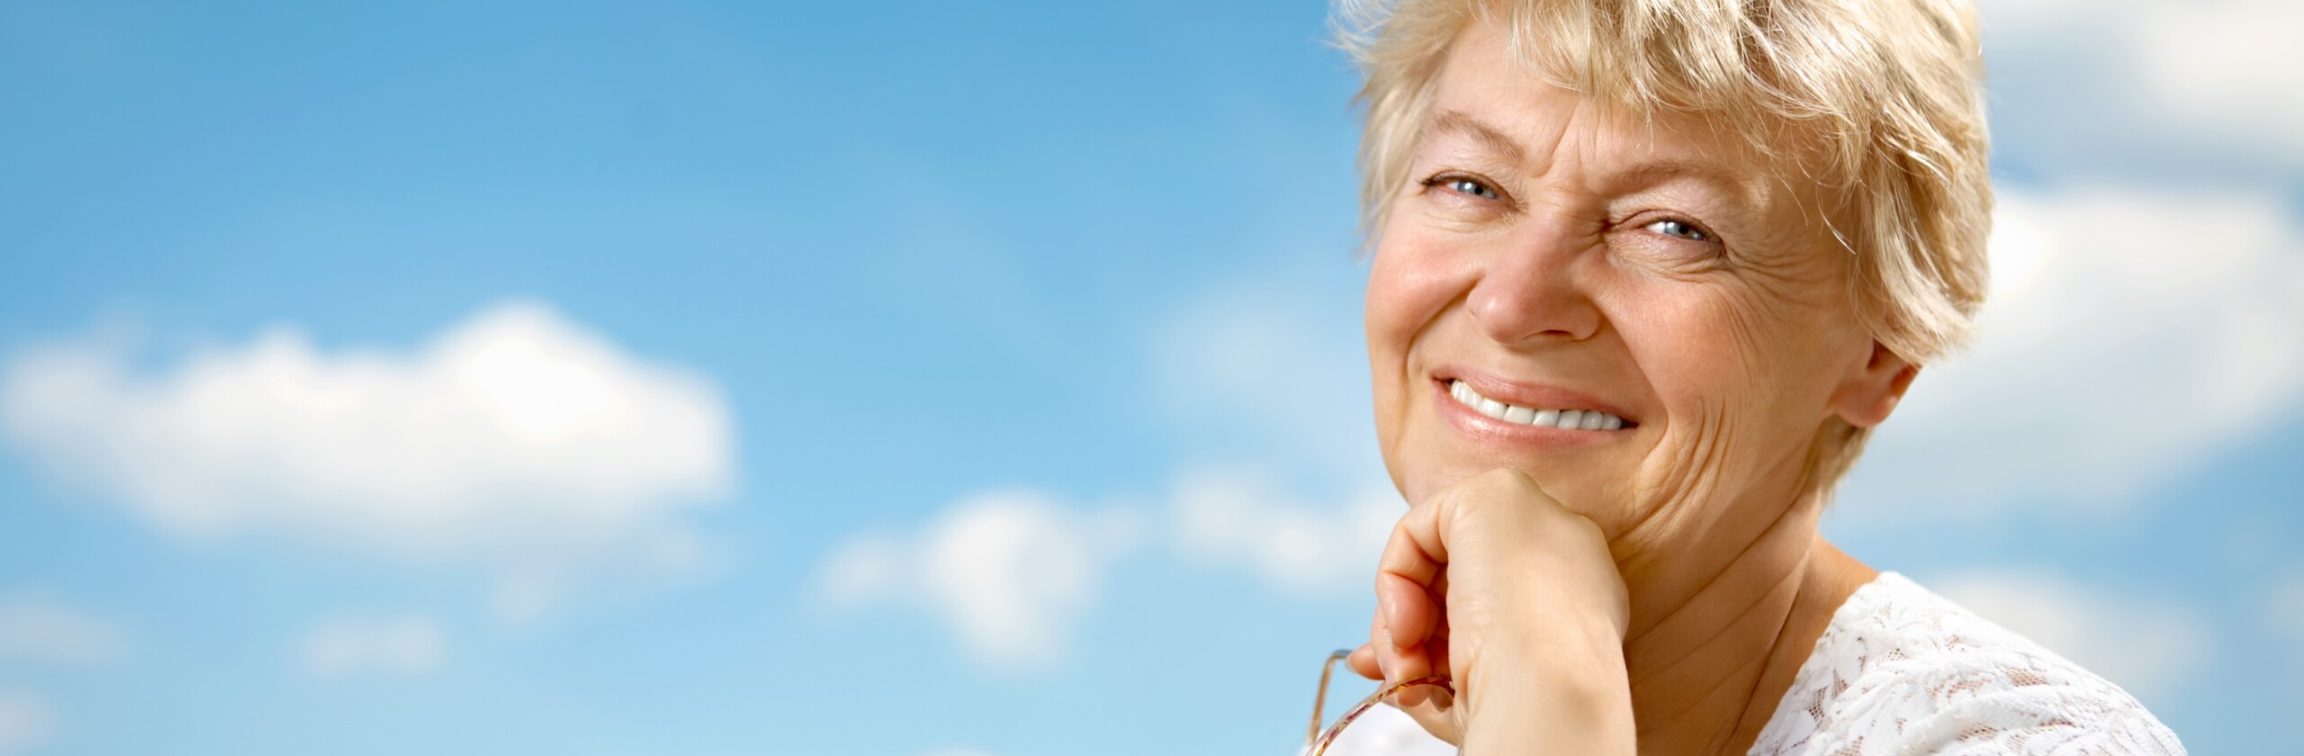 The beautiful woman is elderly against the bright blue sky